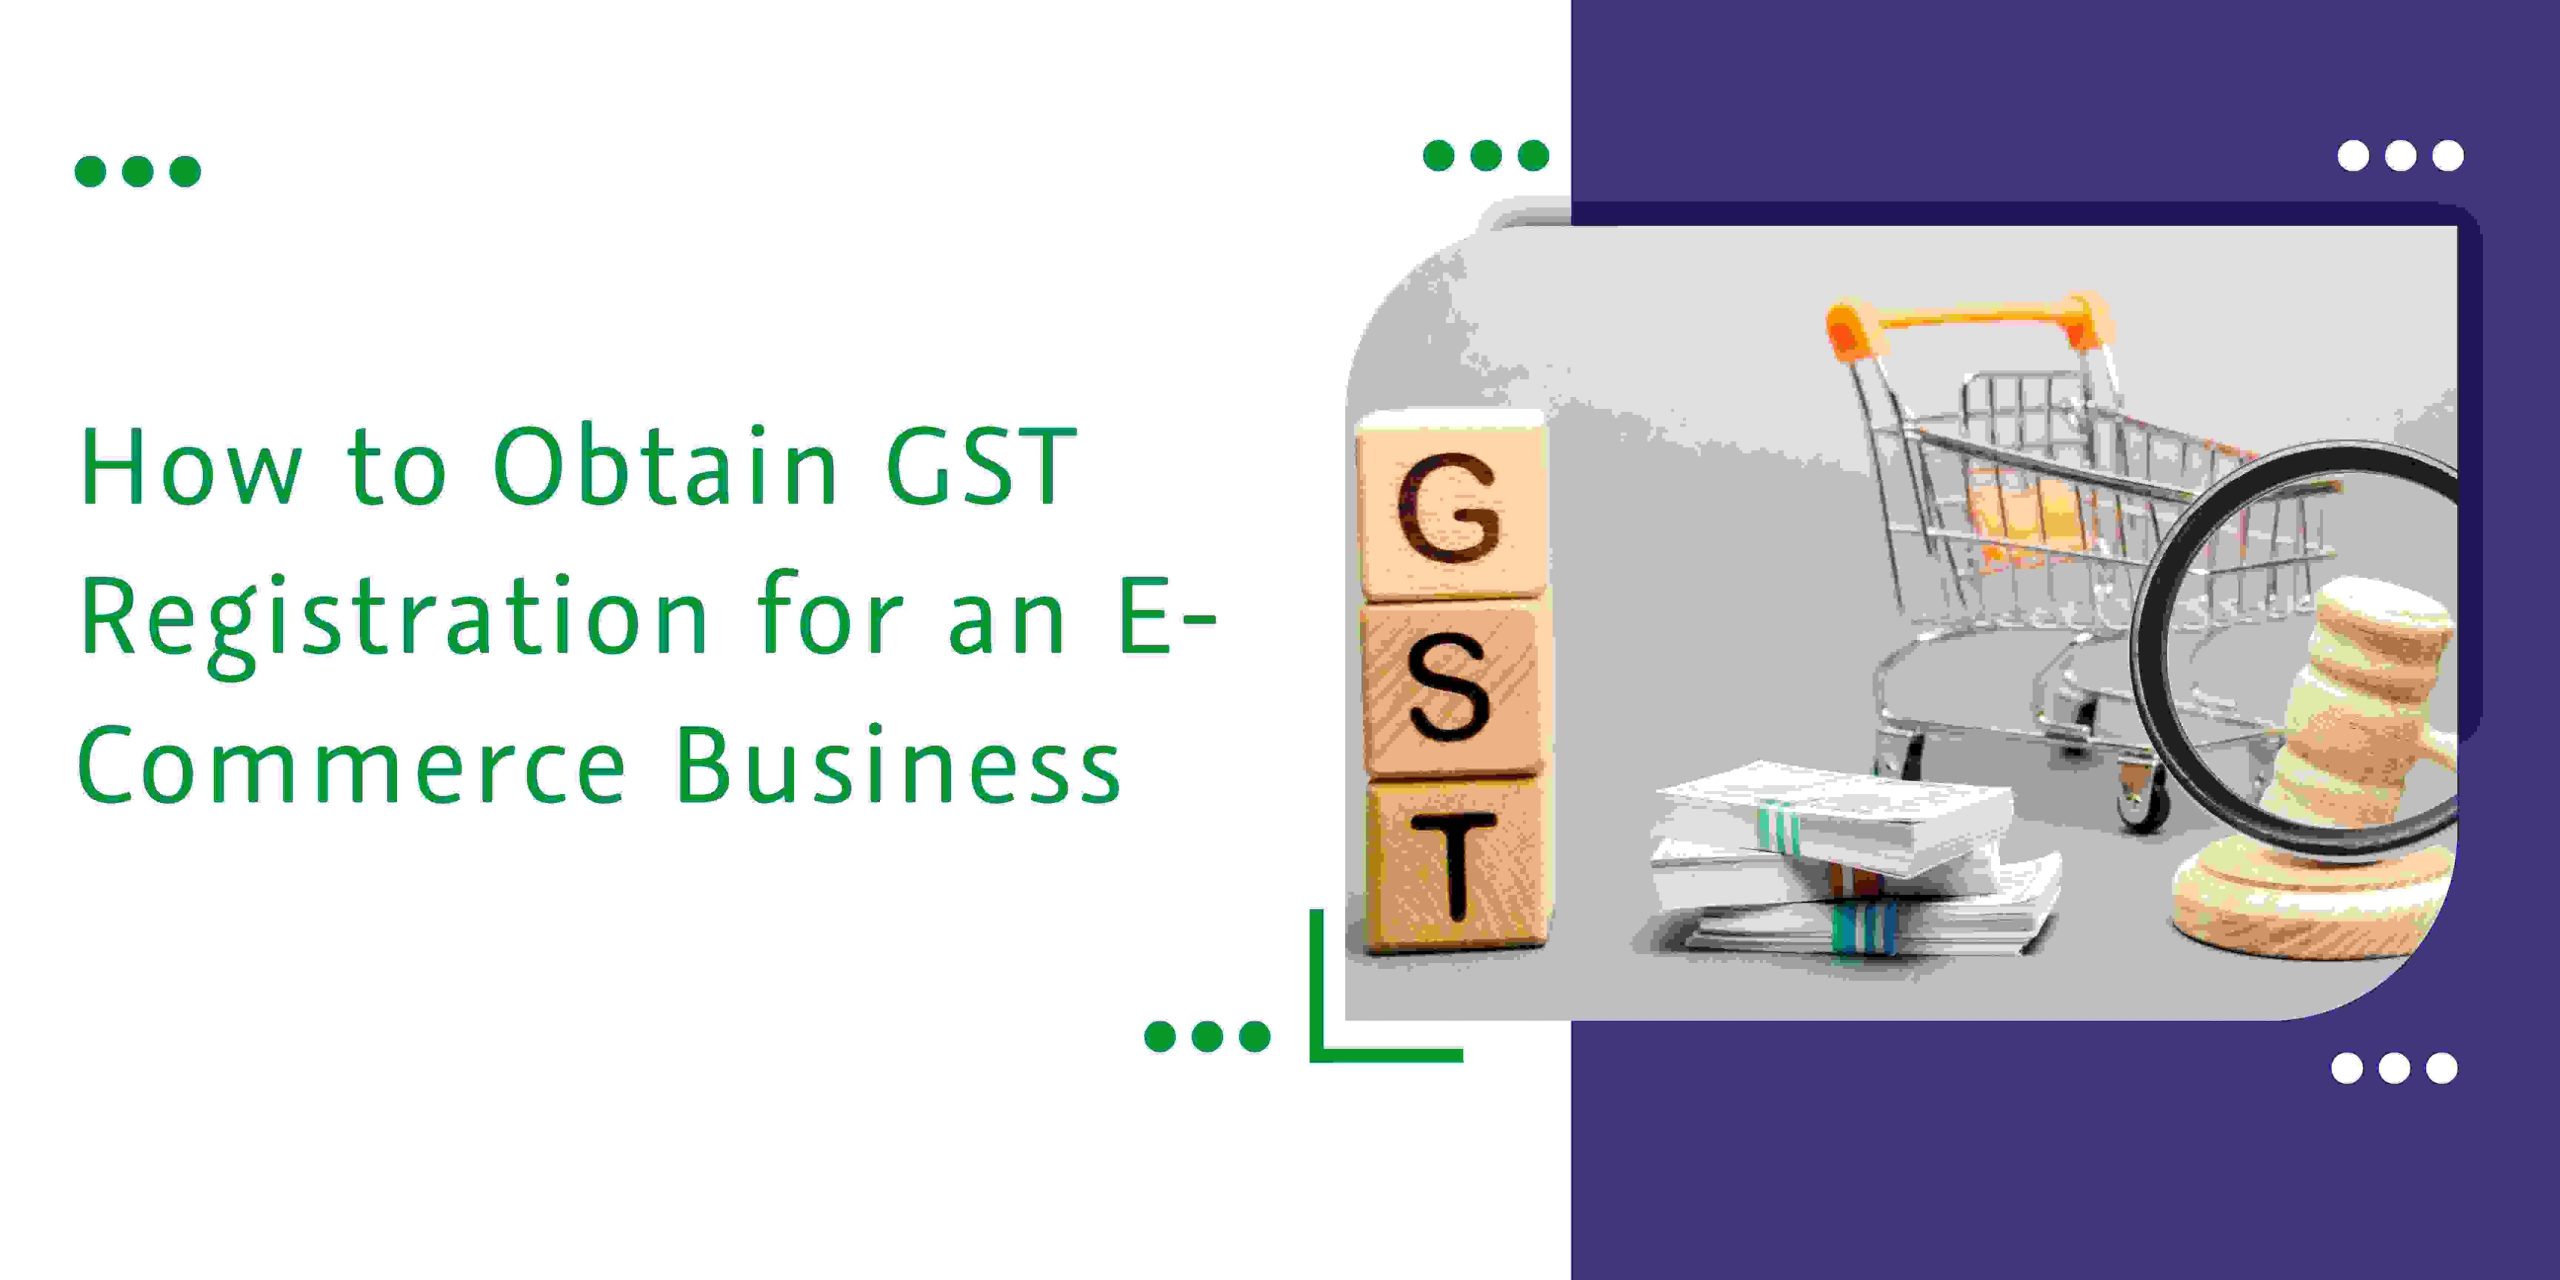 CaptainBiz: A Step-by-Step Guide to GST Registration for E-Commerce Businesses